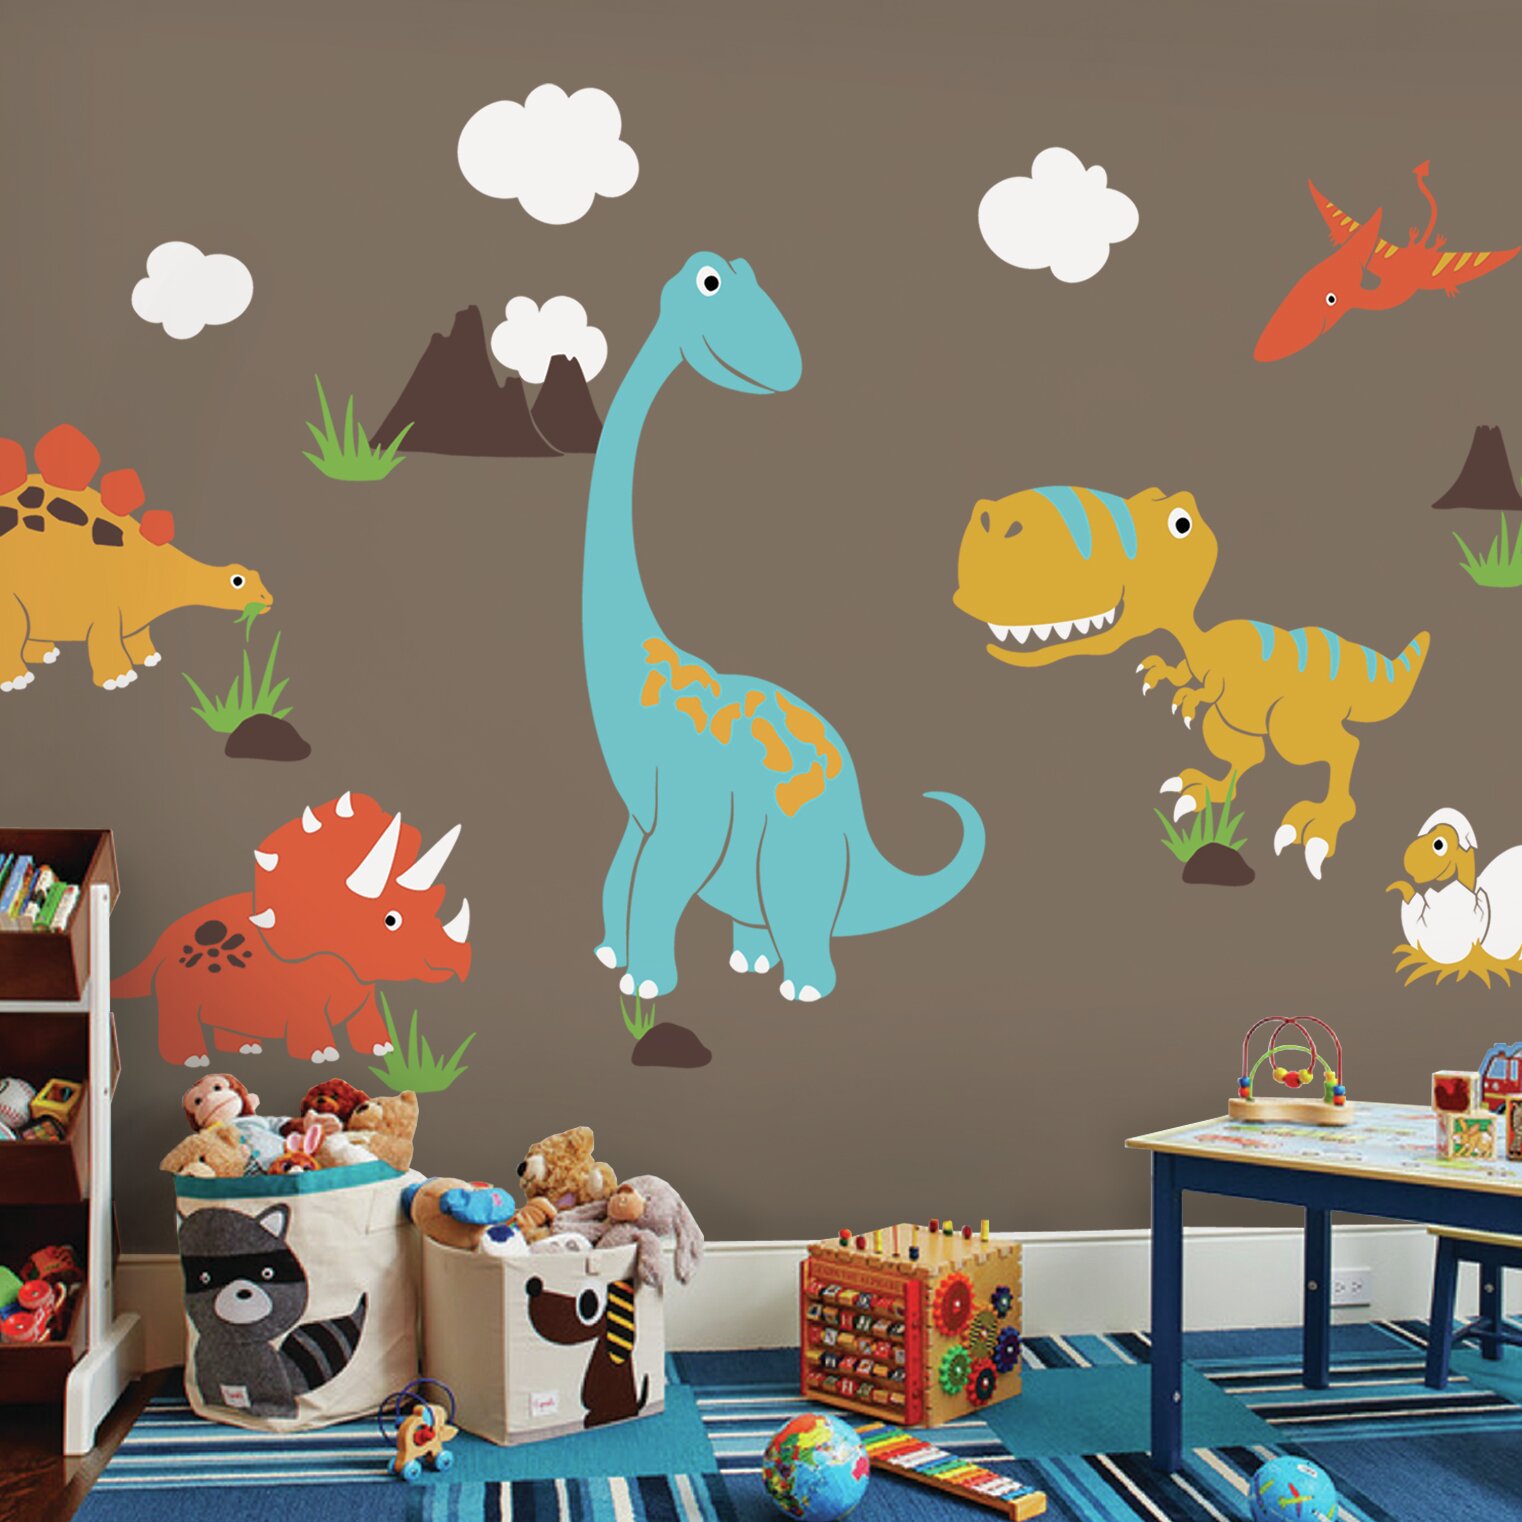 Green Glow 114 Pieces Dinosaur Wall Decals Glow in The Dark Dinosaur Wall Stickers Removable Dinosaur Wall Decor Dinosaur Wall Mural for Kids Nursery Living Room Classroom Birthday Decoration 